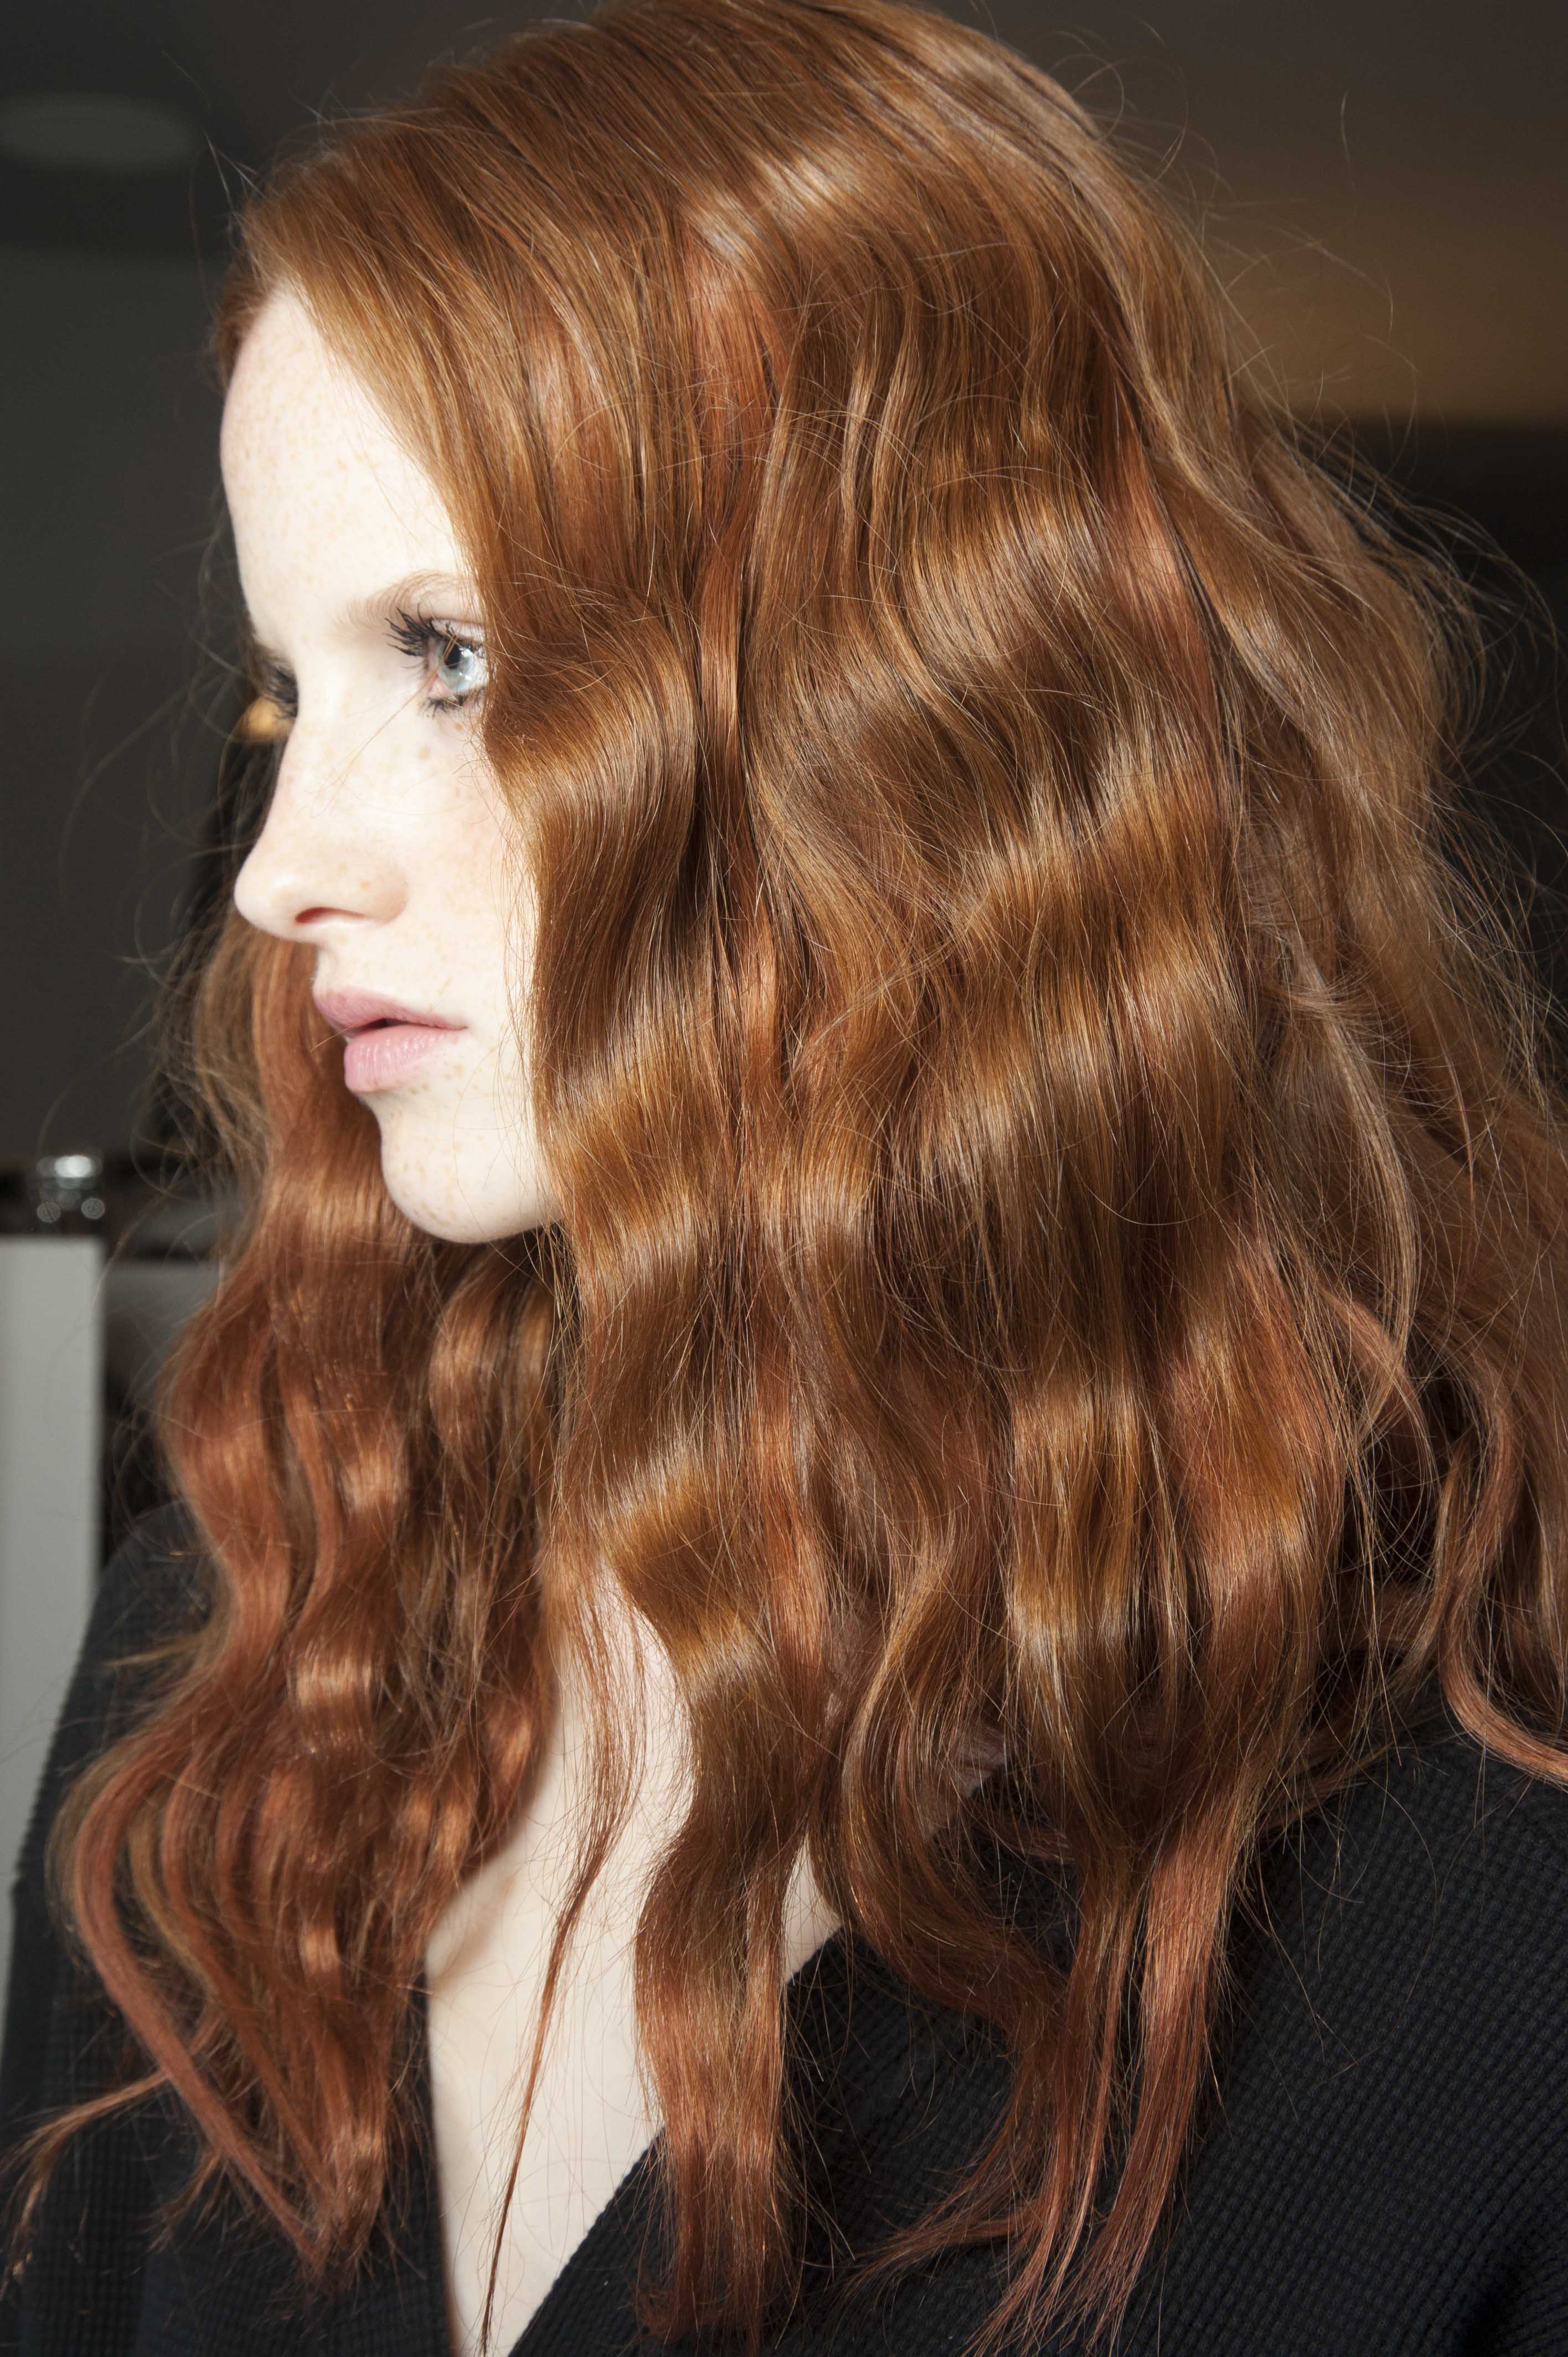 How to get beach waves hair with a straightener - Quora